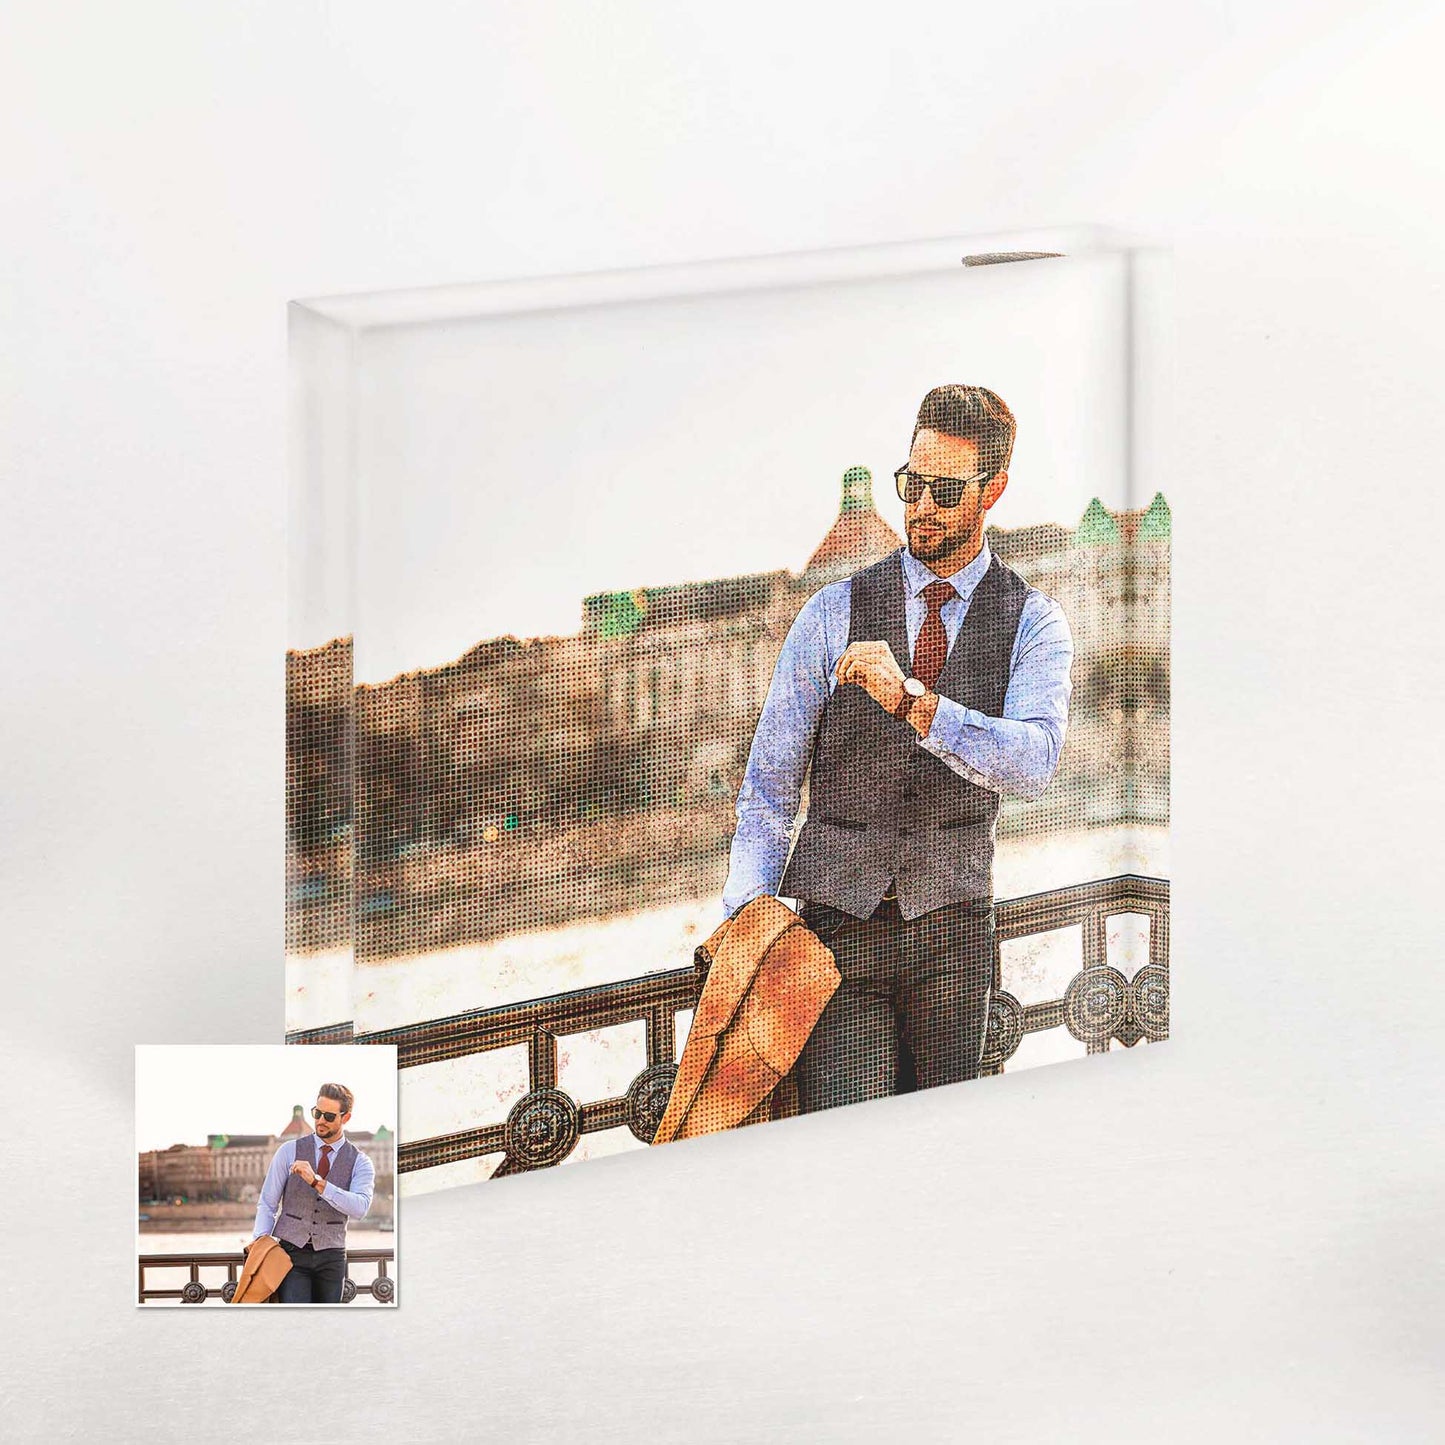 Personalised Grunge FX Acrylic Block Photo: A fusion of oldschool nostalgia and creative design. The halftone effect adds a unique charm, making it a standout piece in any home decor